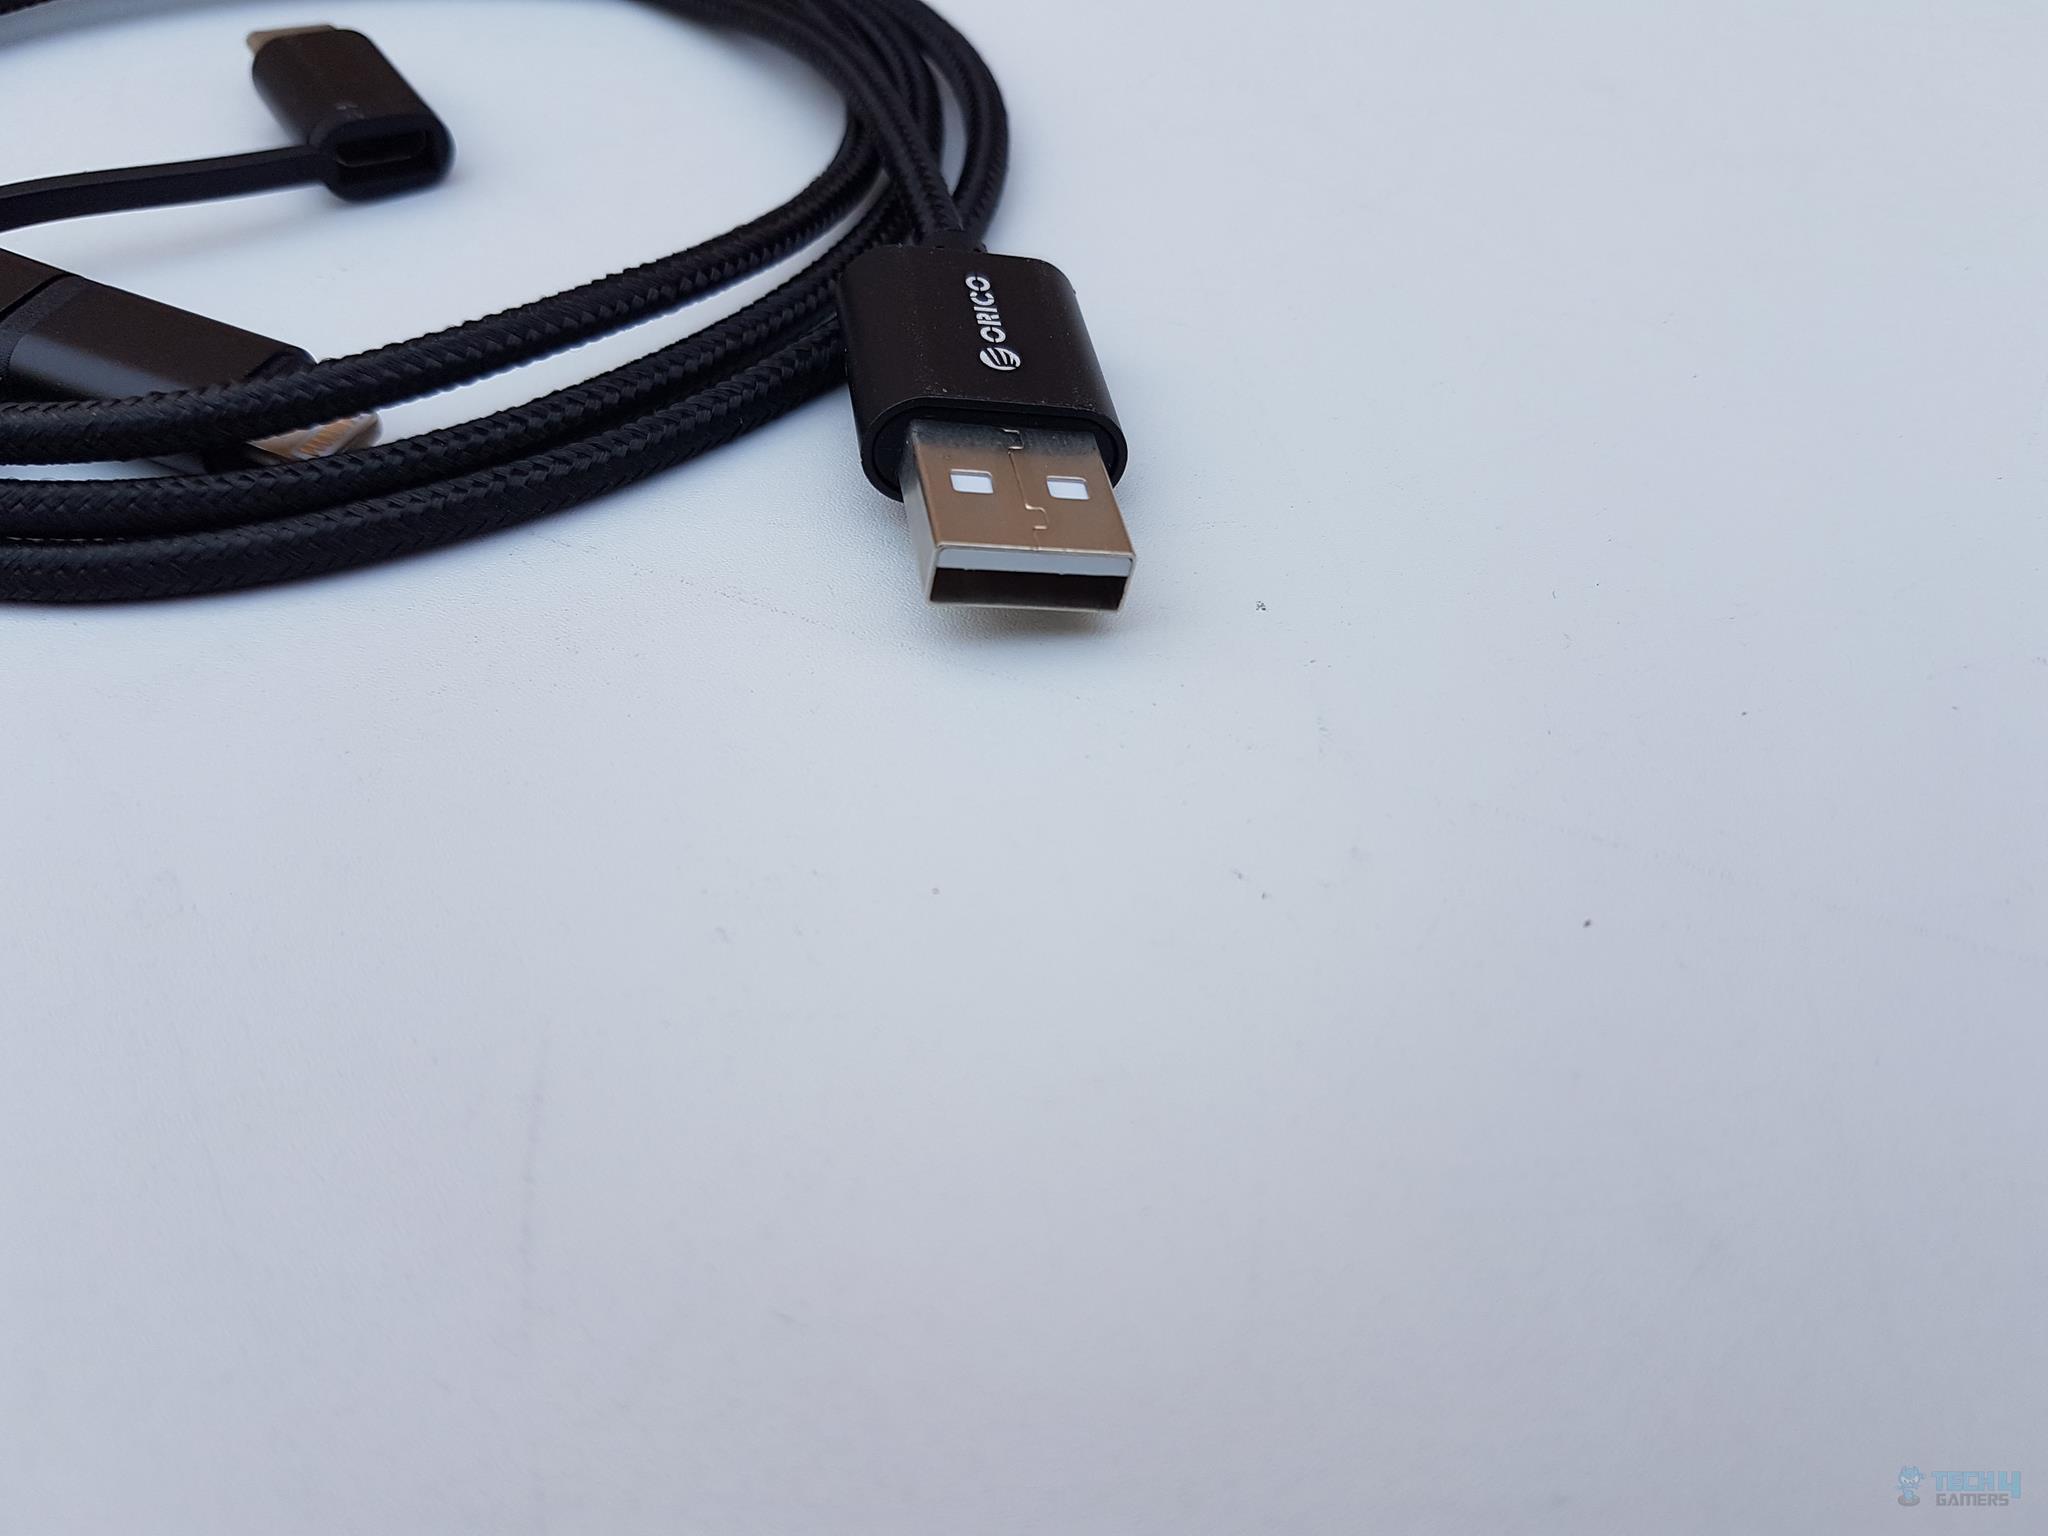 HT3-12-BK Cable Review Closer Look Connector USB